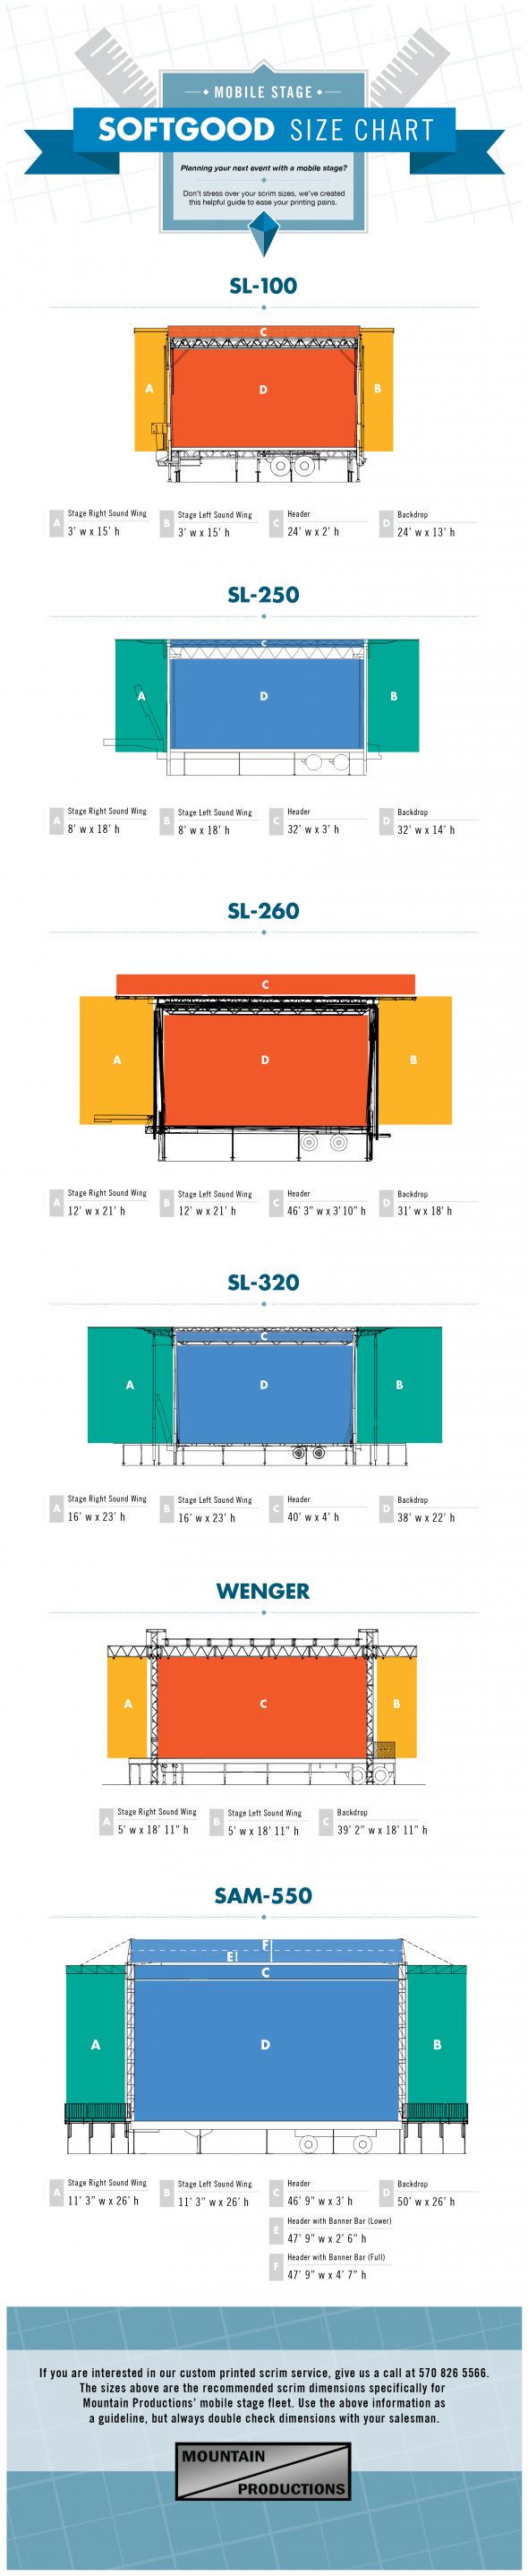 Mobile Stage Softgood Sizes